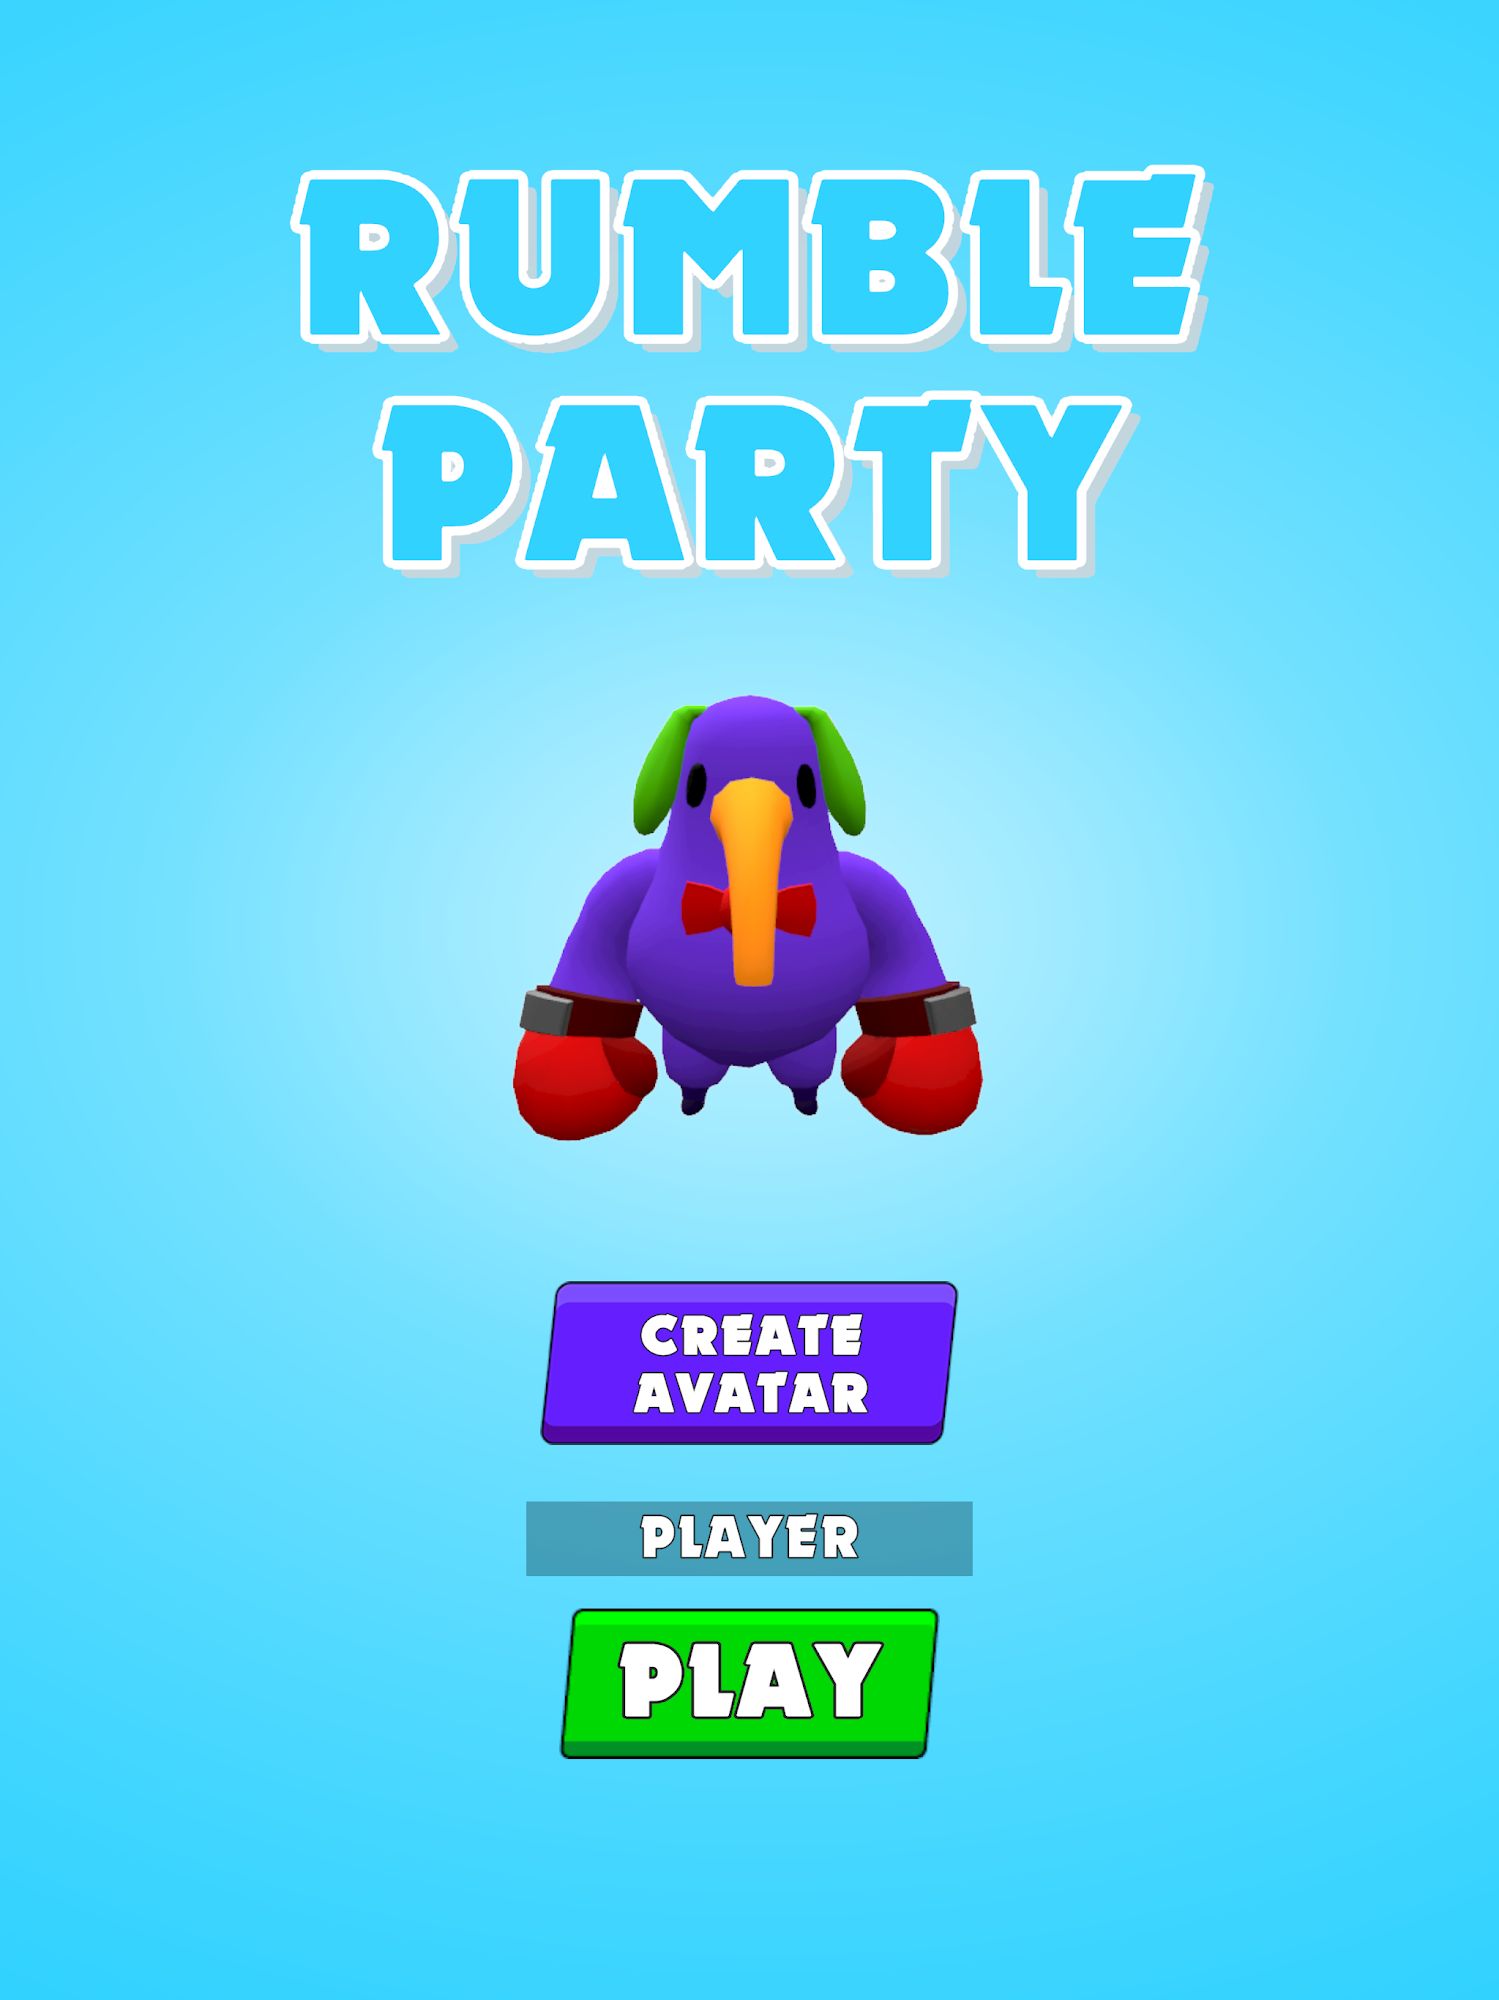 Scarica Rumble Party gratis per Android.